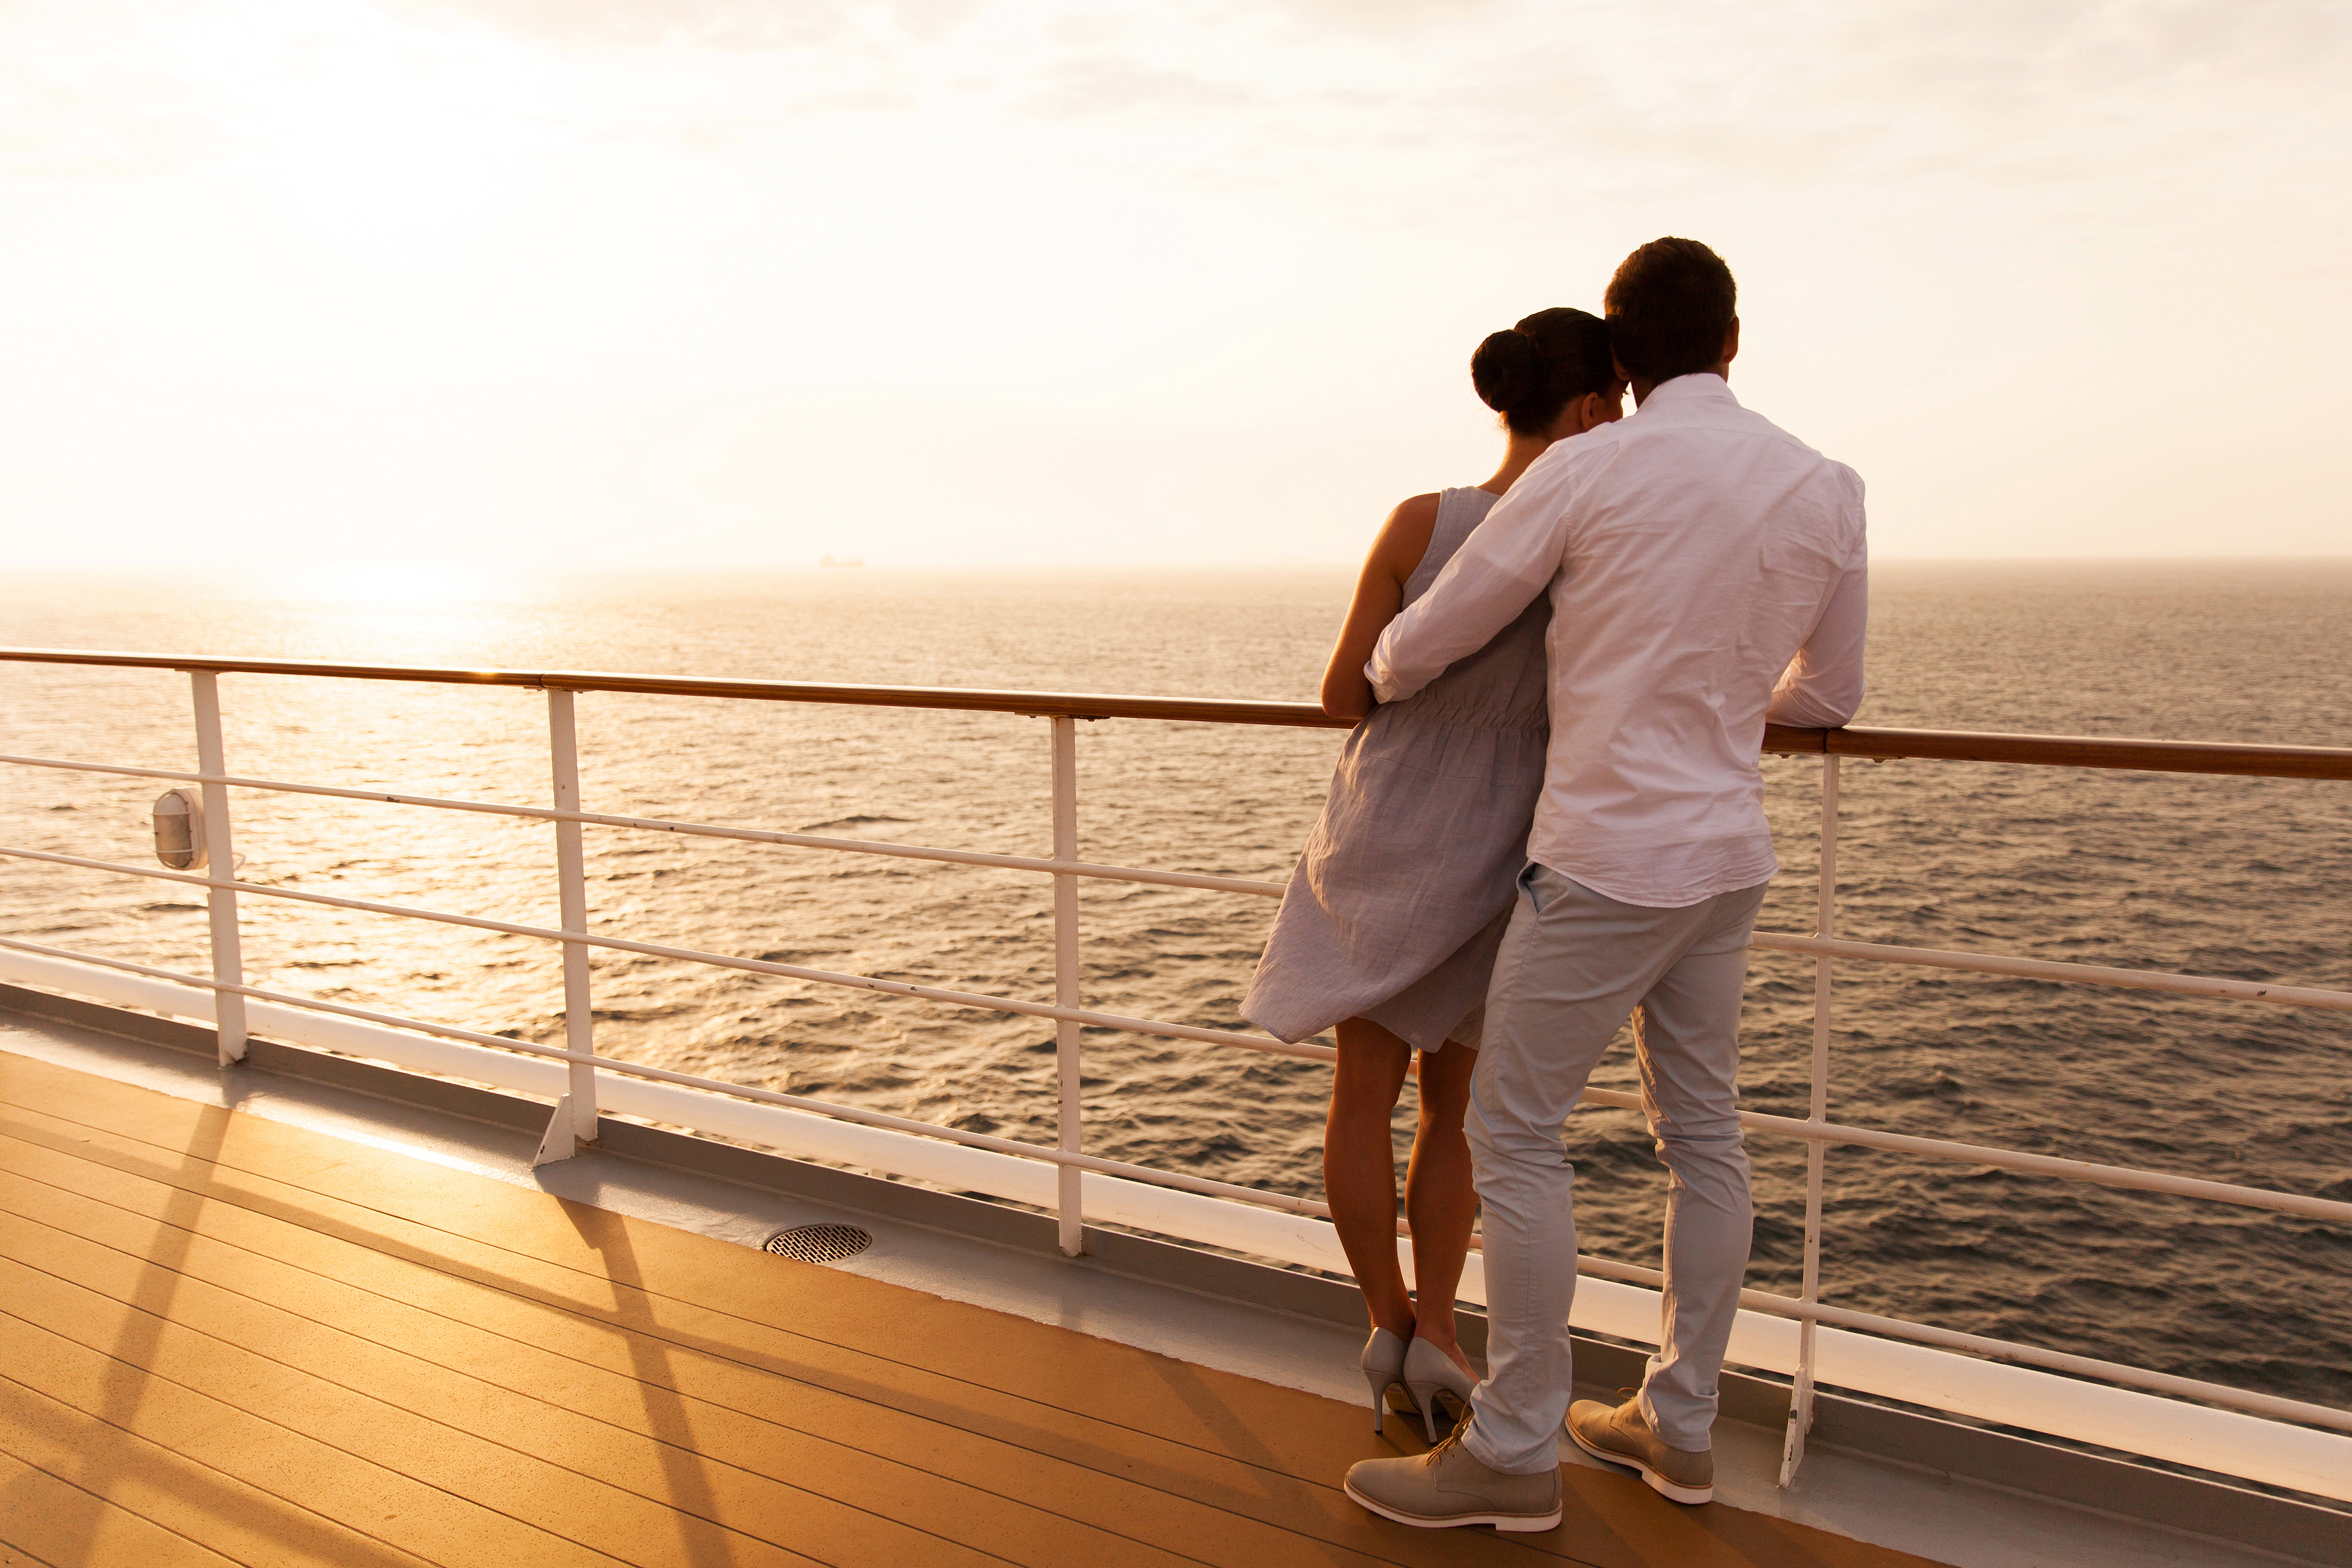 Valentine's Day is coming up, so it's the perfect time to think about taking a romantic cruise